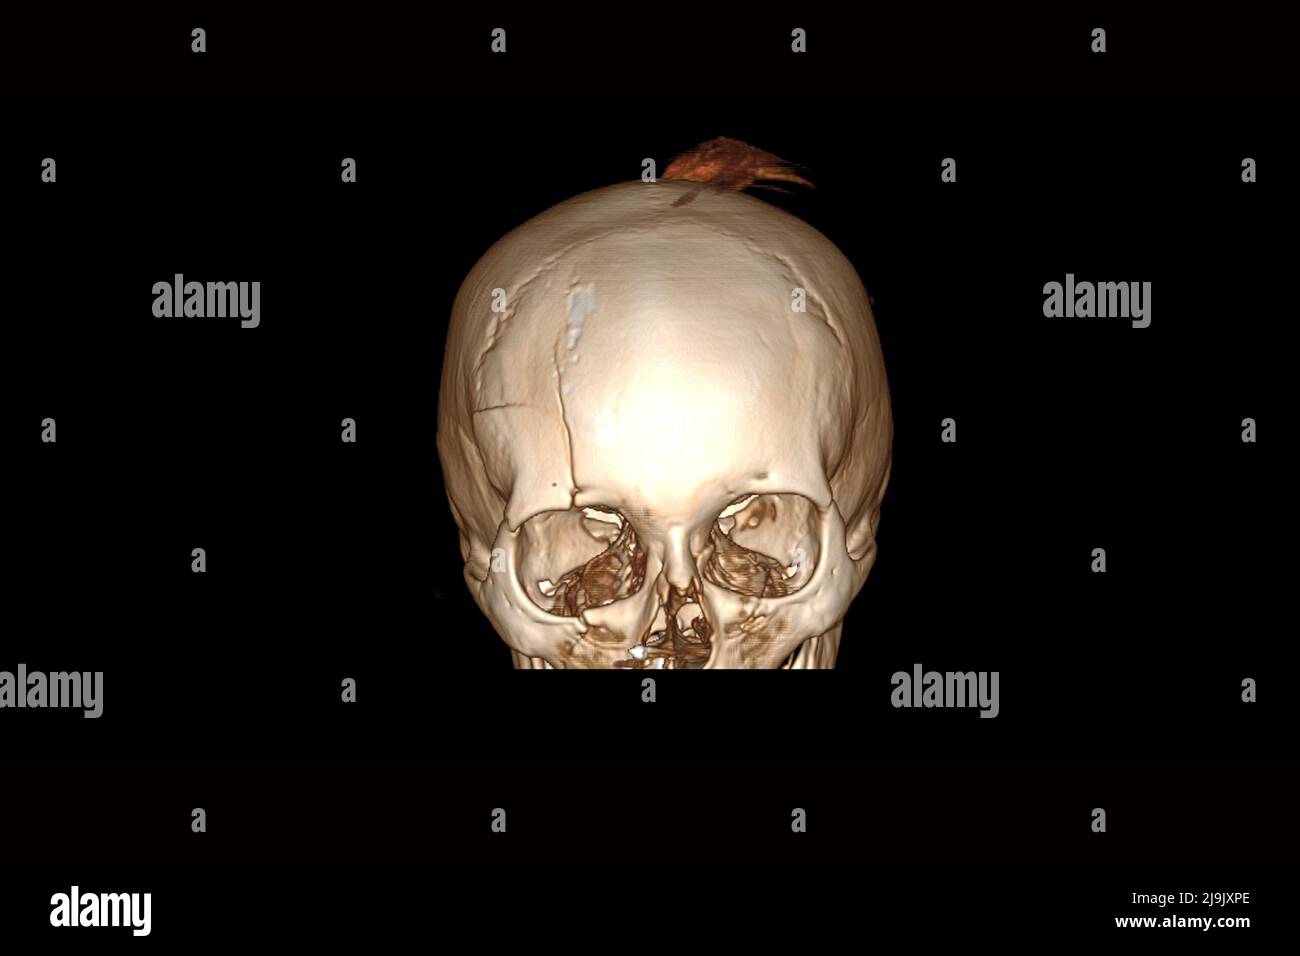 computed tomography of the skull with a cracked forehead after falling, skull fracture, 3D computed tomography of the skull Stock Photo